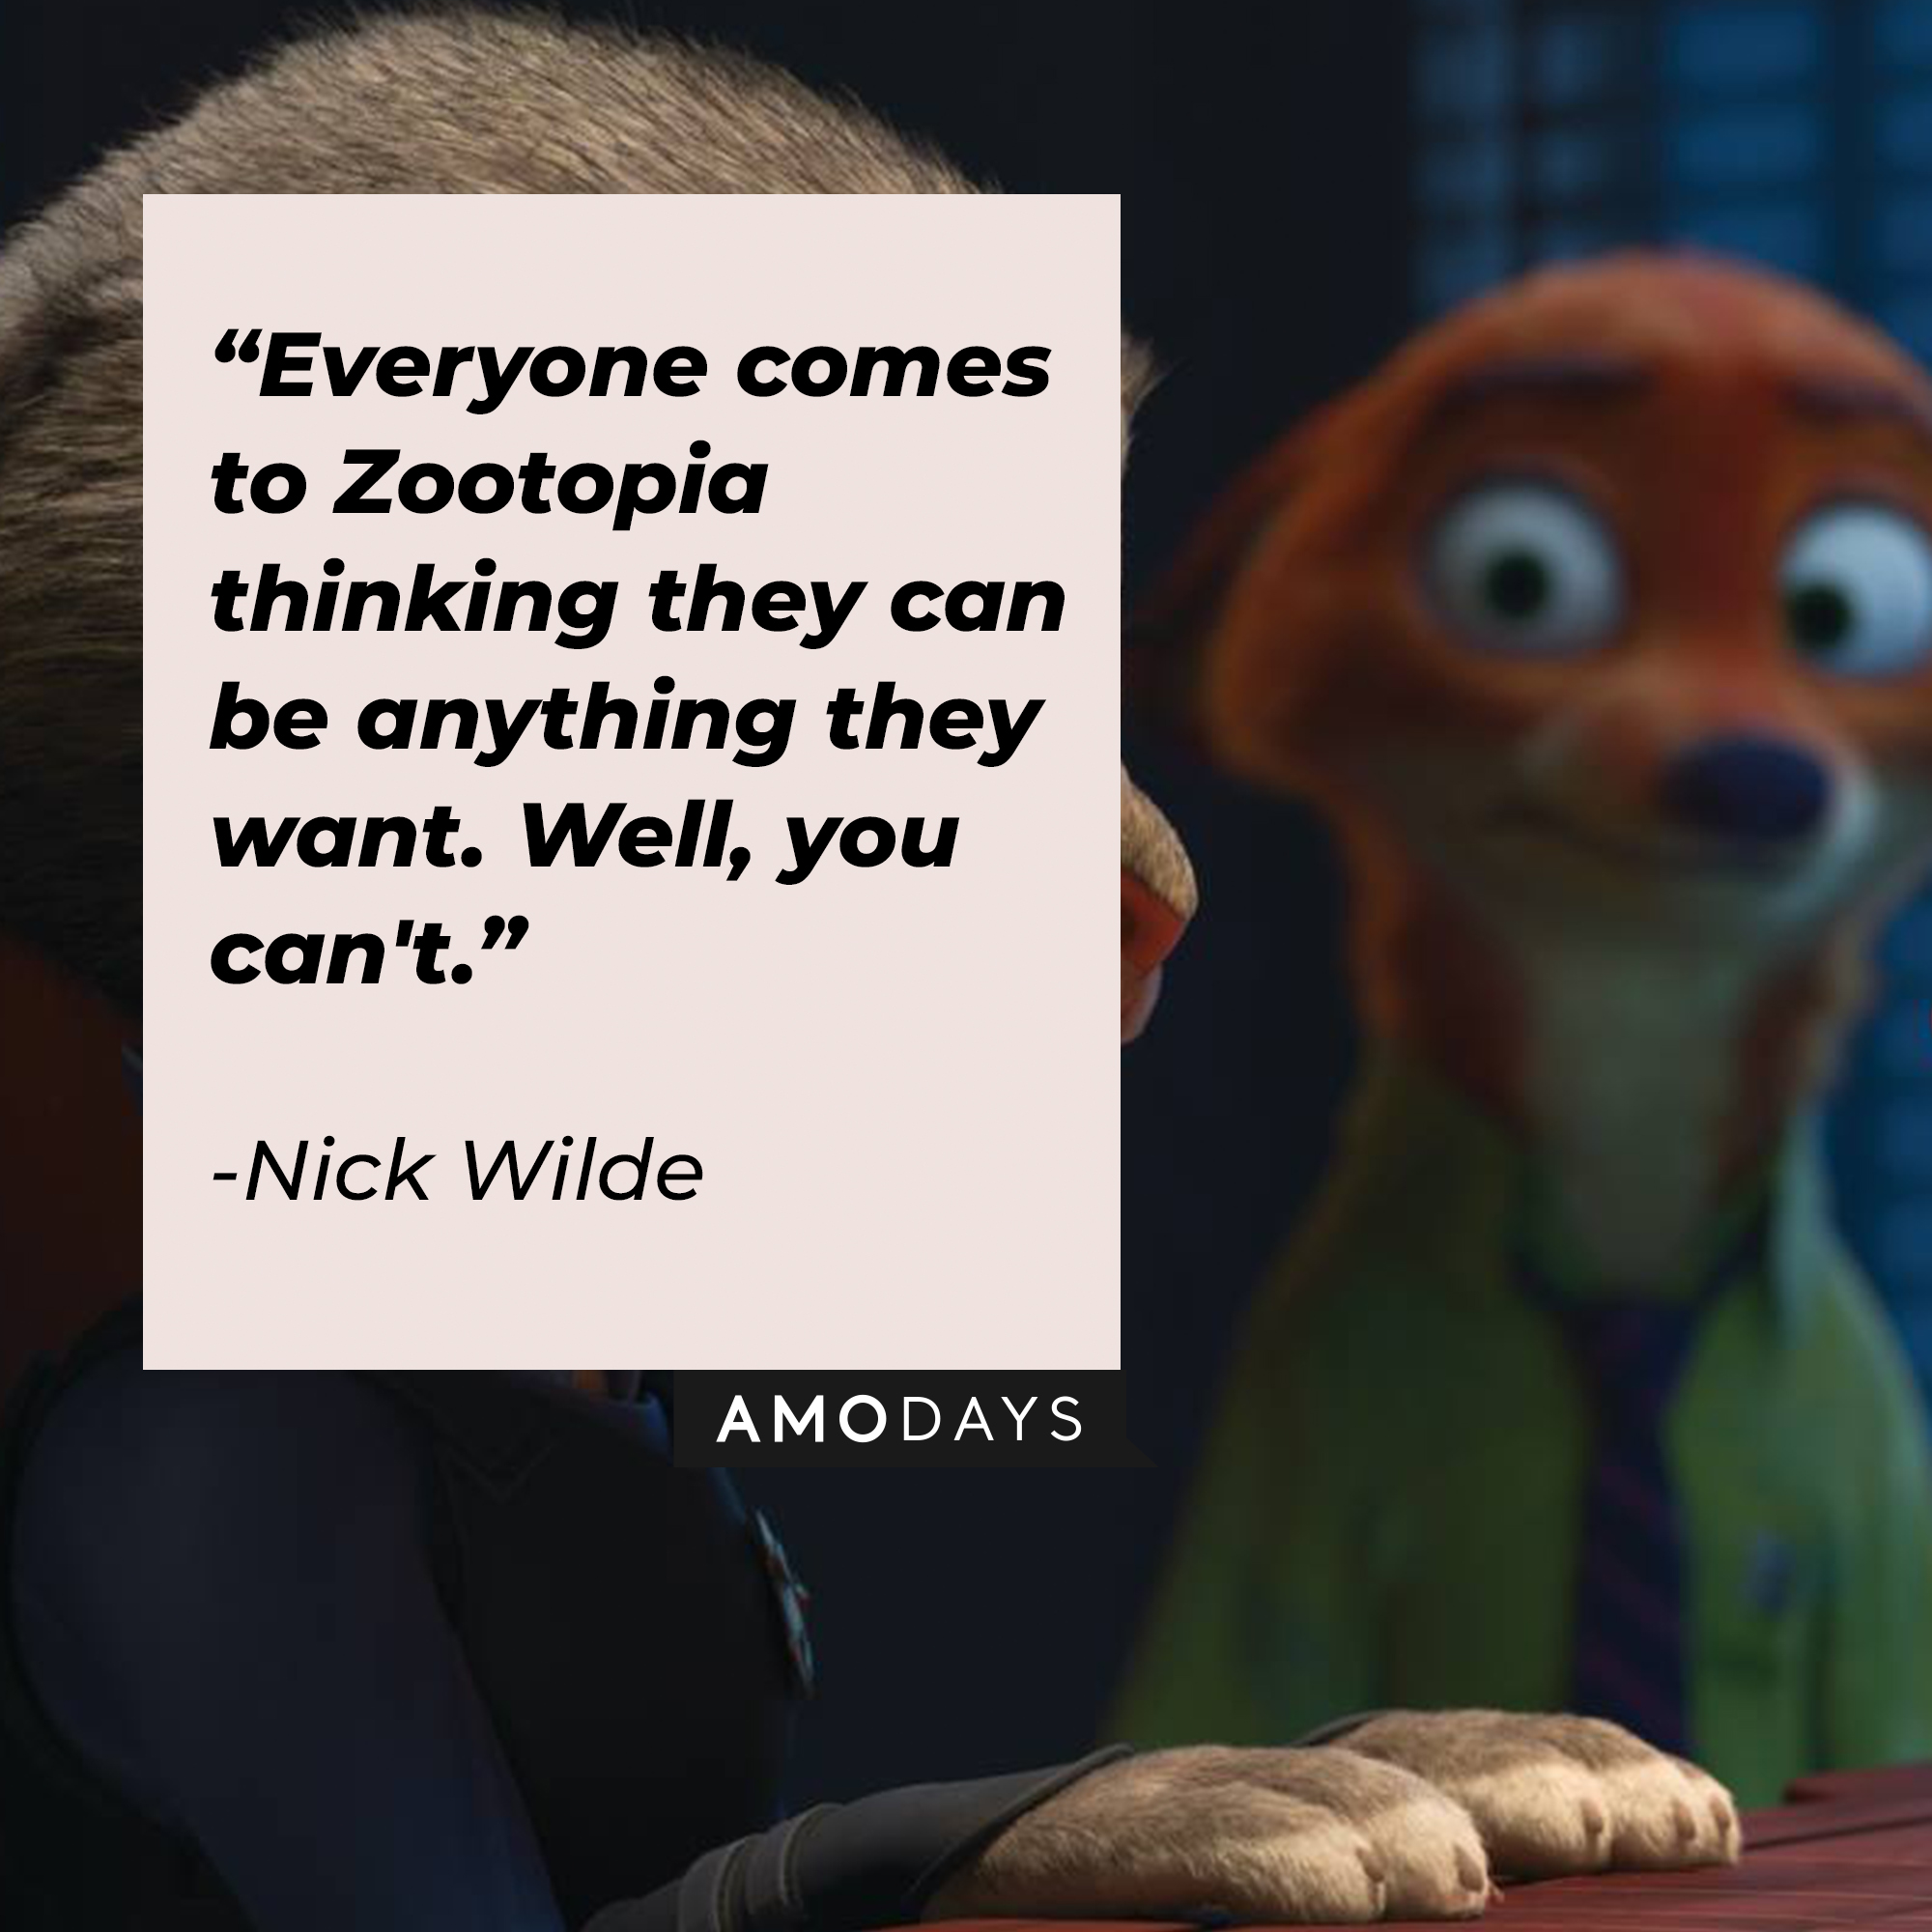 Nick Wilde, with his quote: “Everyone comes to Zootopia thinking they can be anything they want. Well, you can't.” | Source: facebook.com/DisneyZootopia